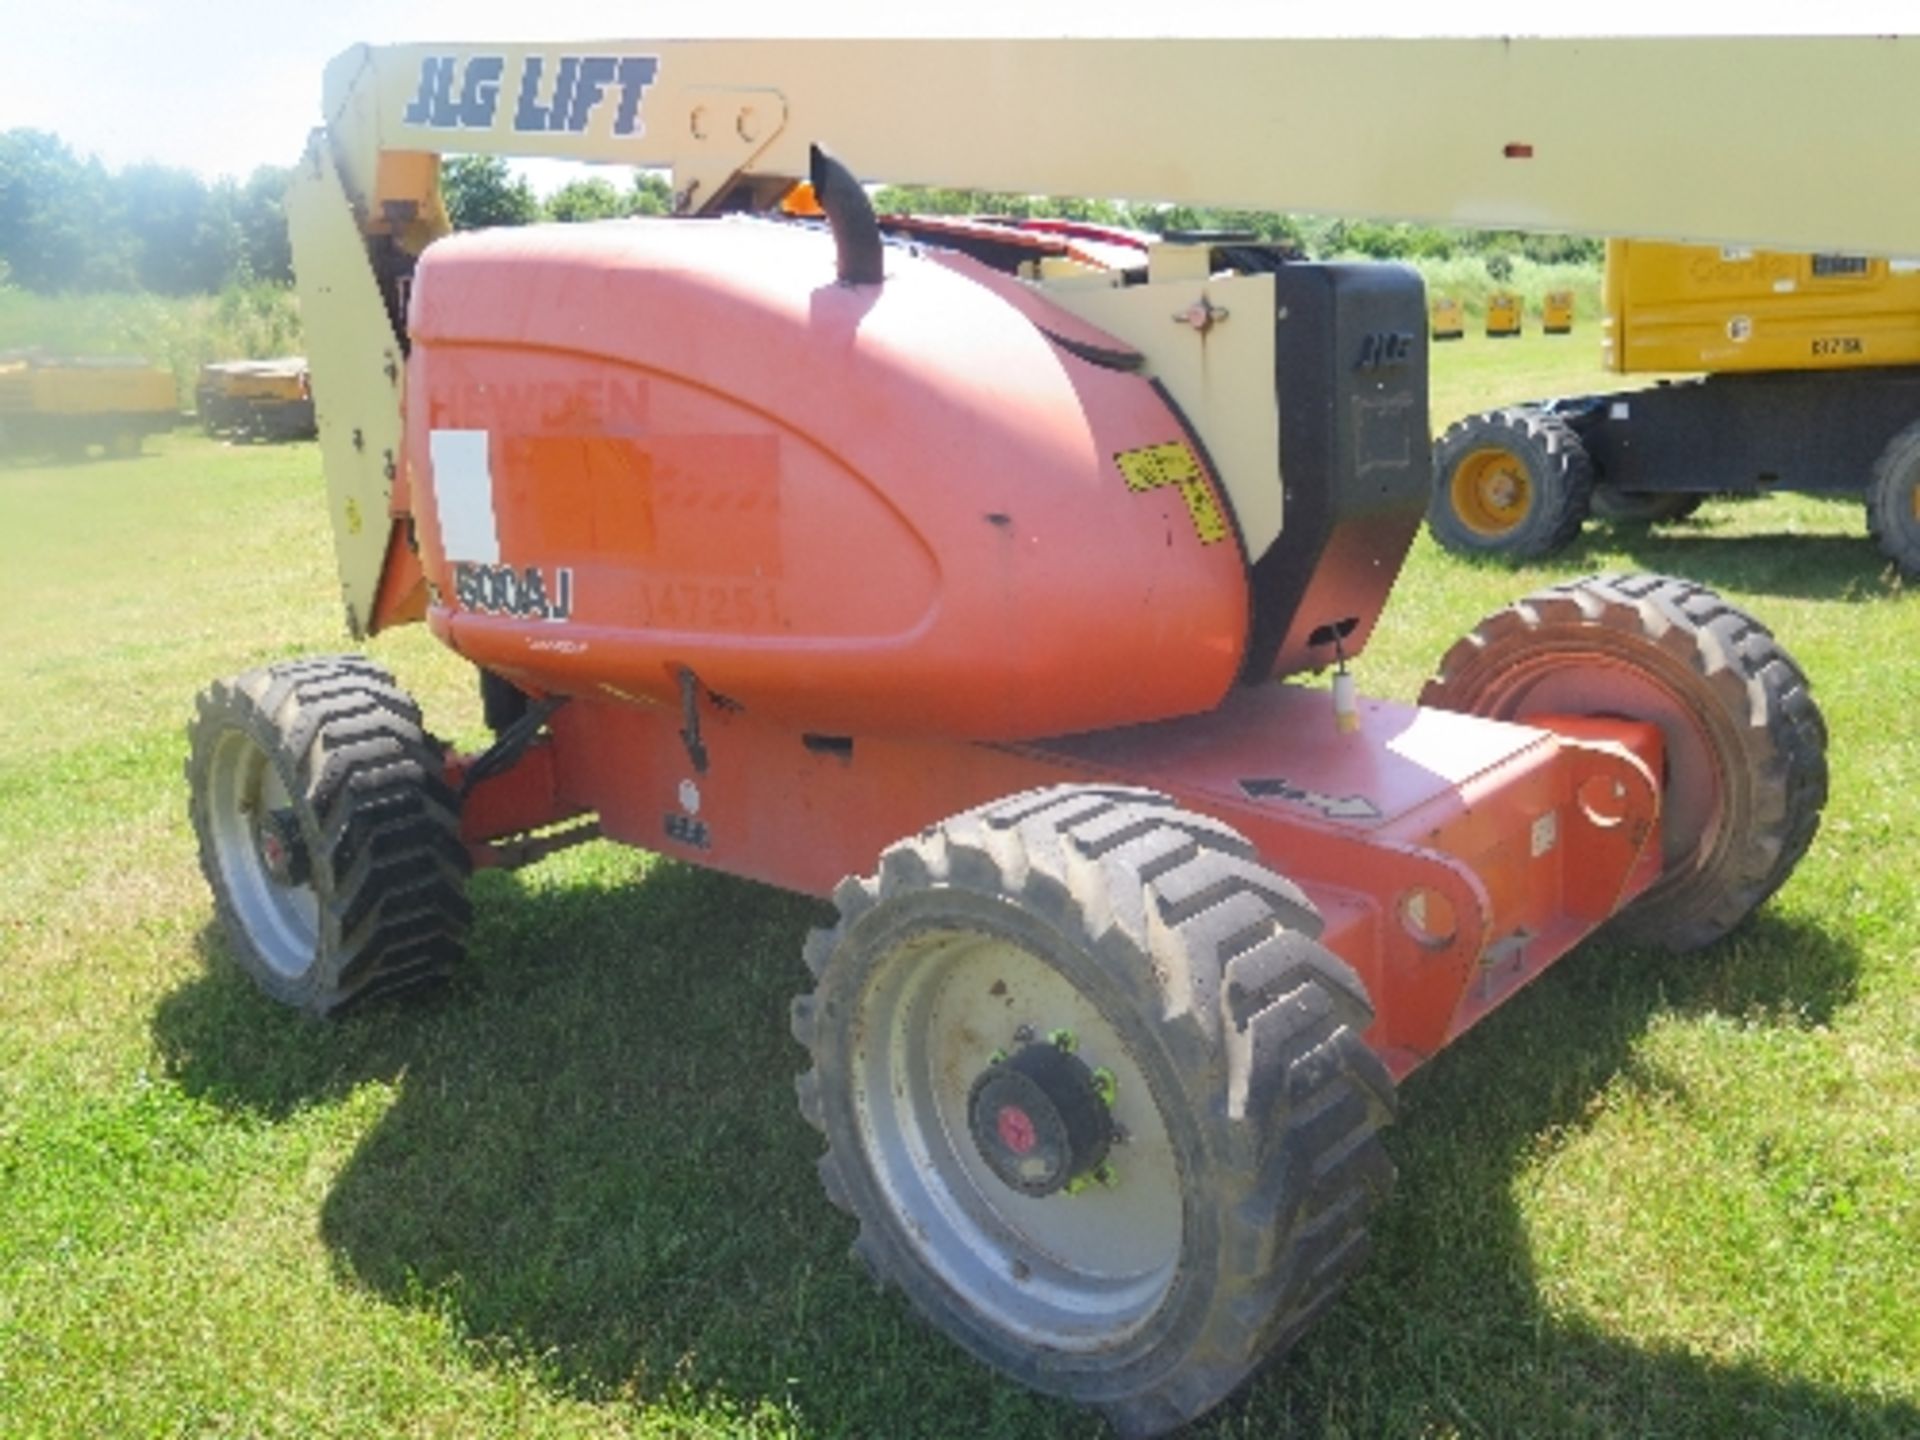 JLG 600AJ artic boom 2619 hrs 2006 147251ALL LOTS are SOLD AS SEEN WITHOUT WARRANTY expressed, given - Image 3 of 6